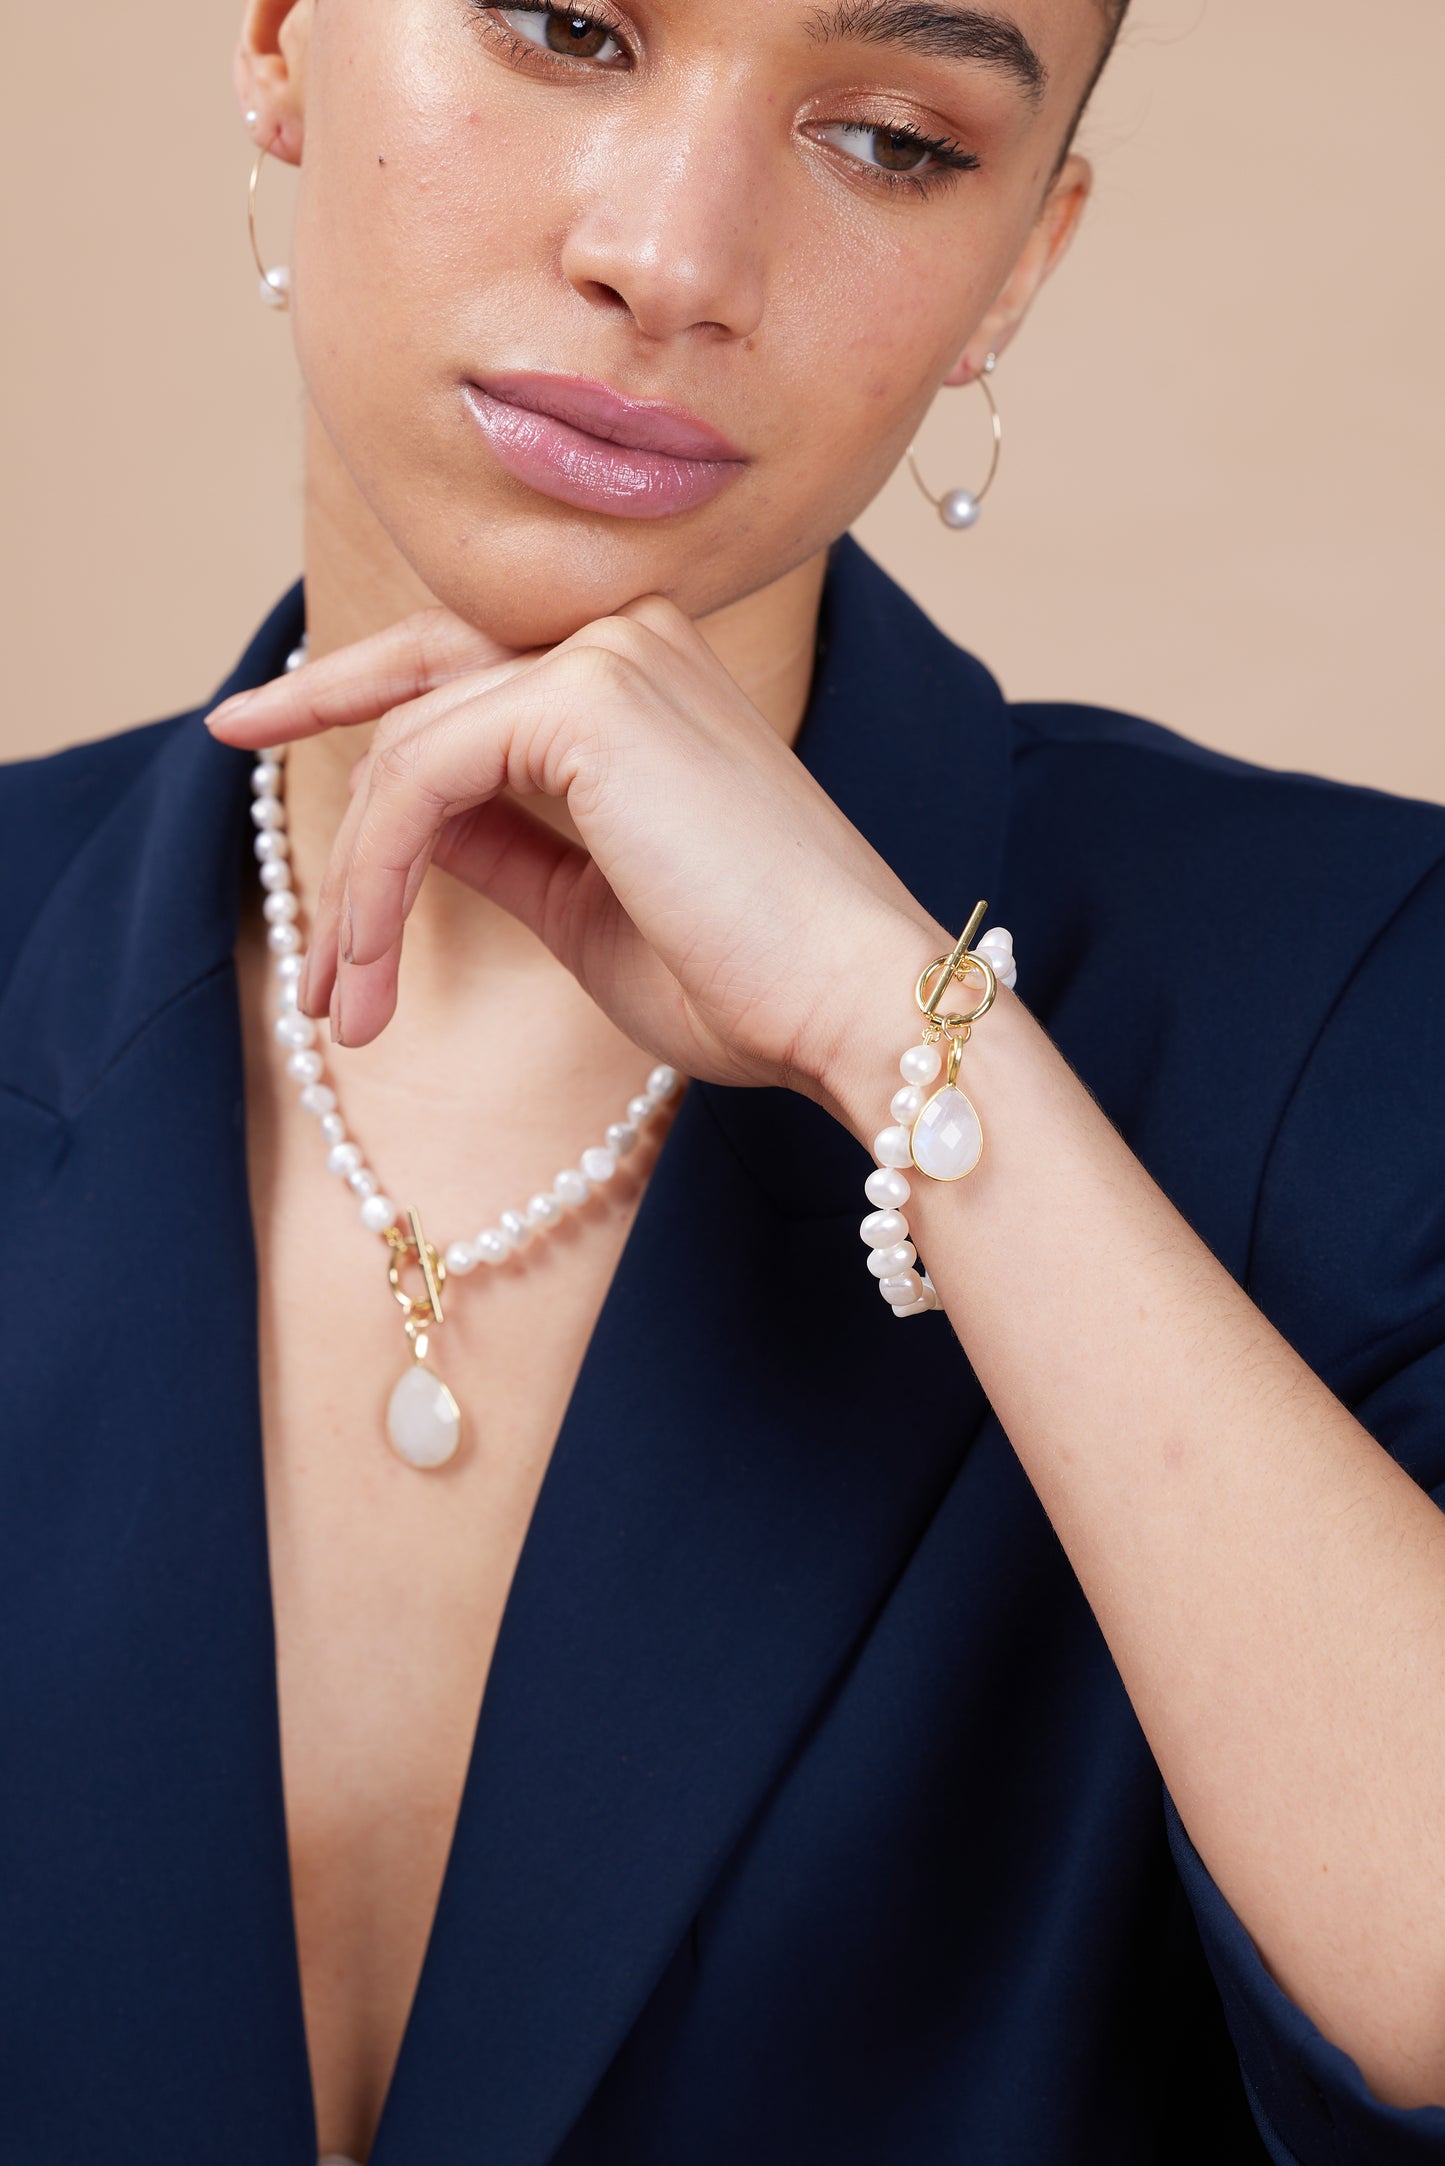 Clara white cultured irregular freshwater pearl necklace with moonstone gold vermeil drop